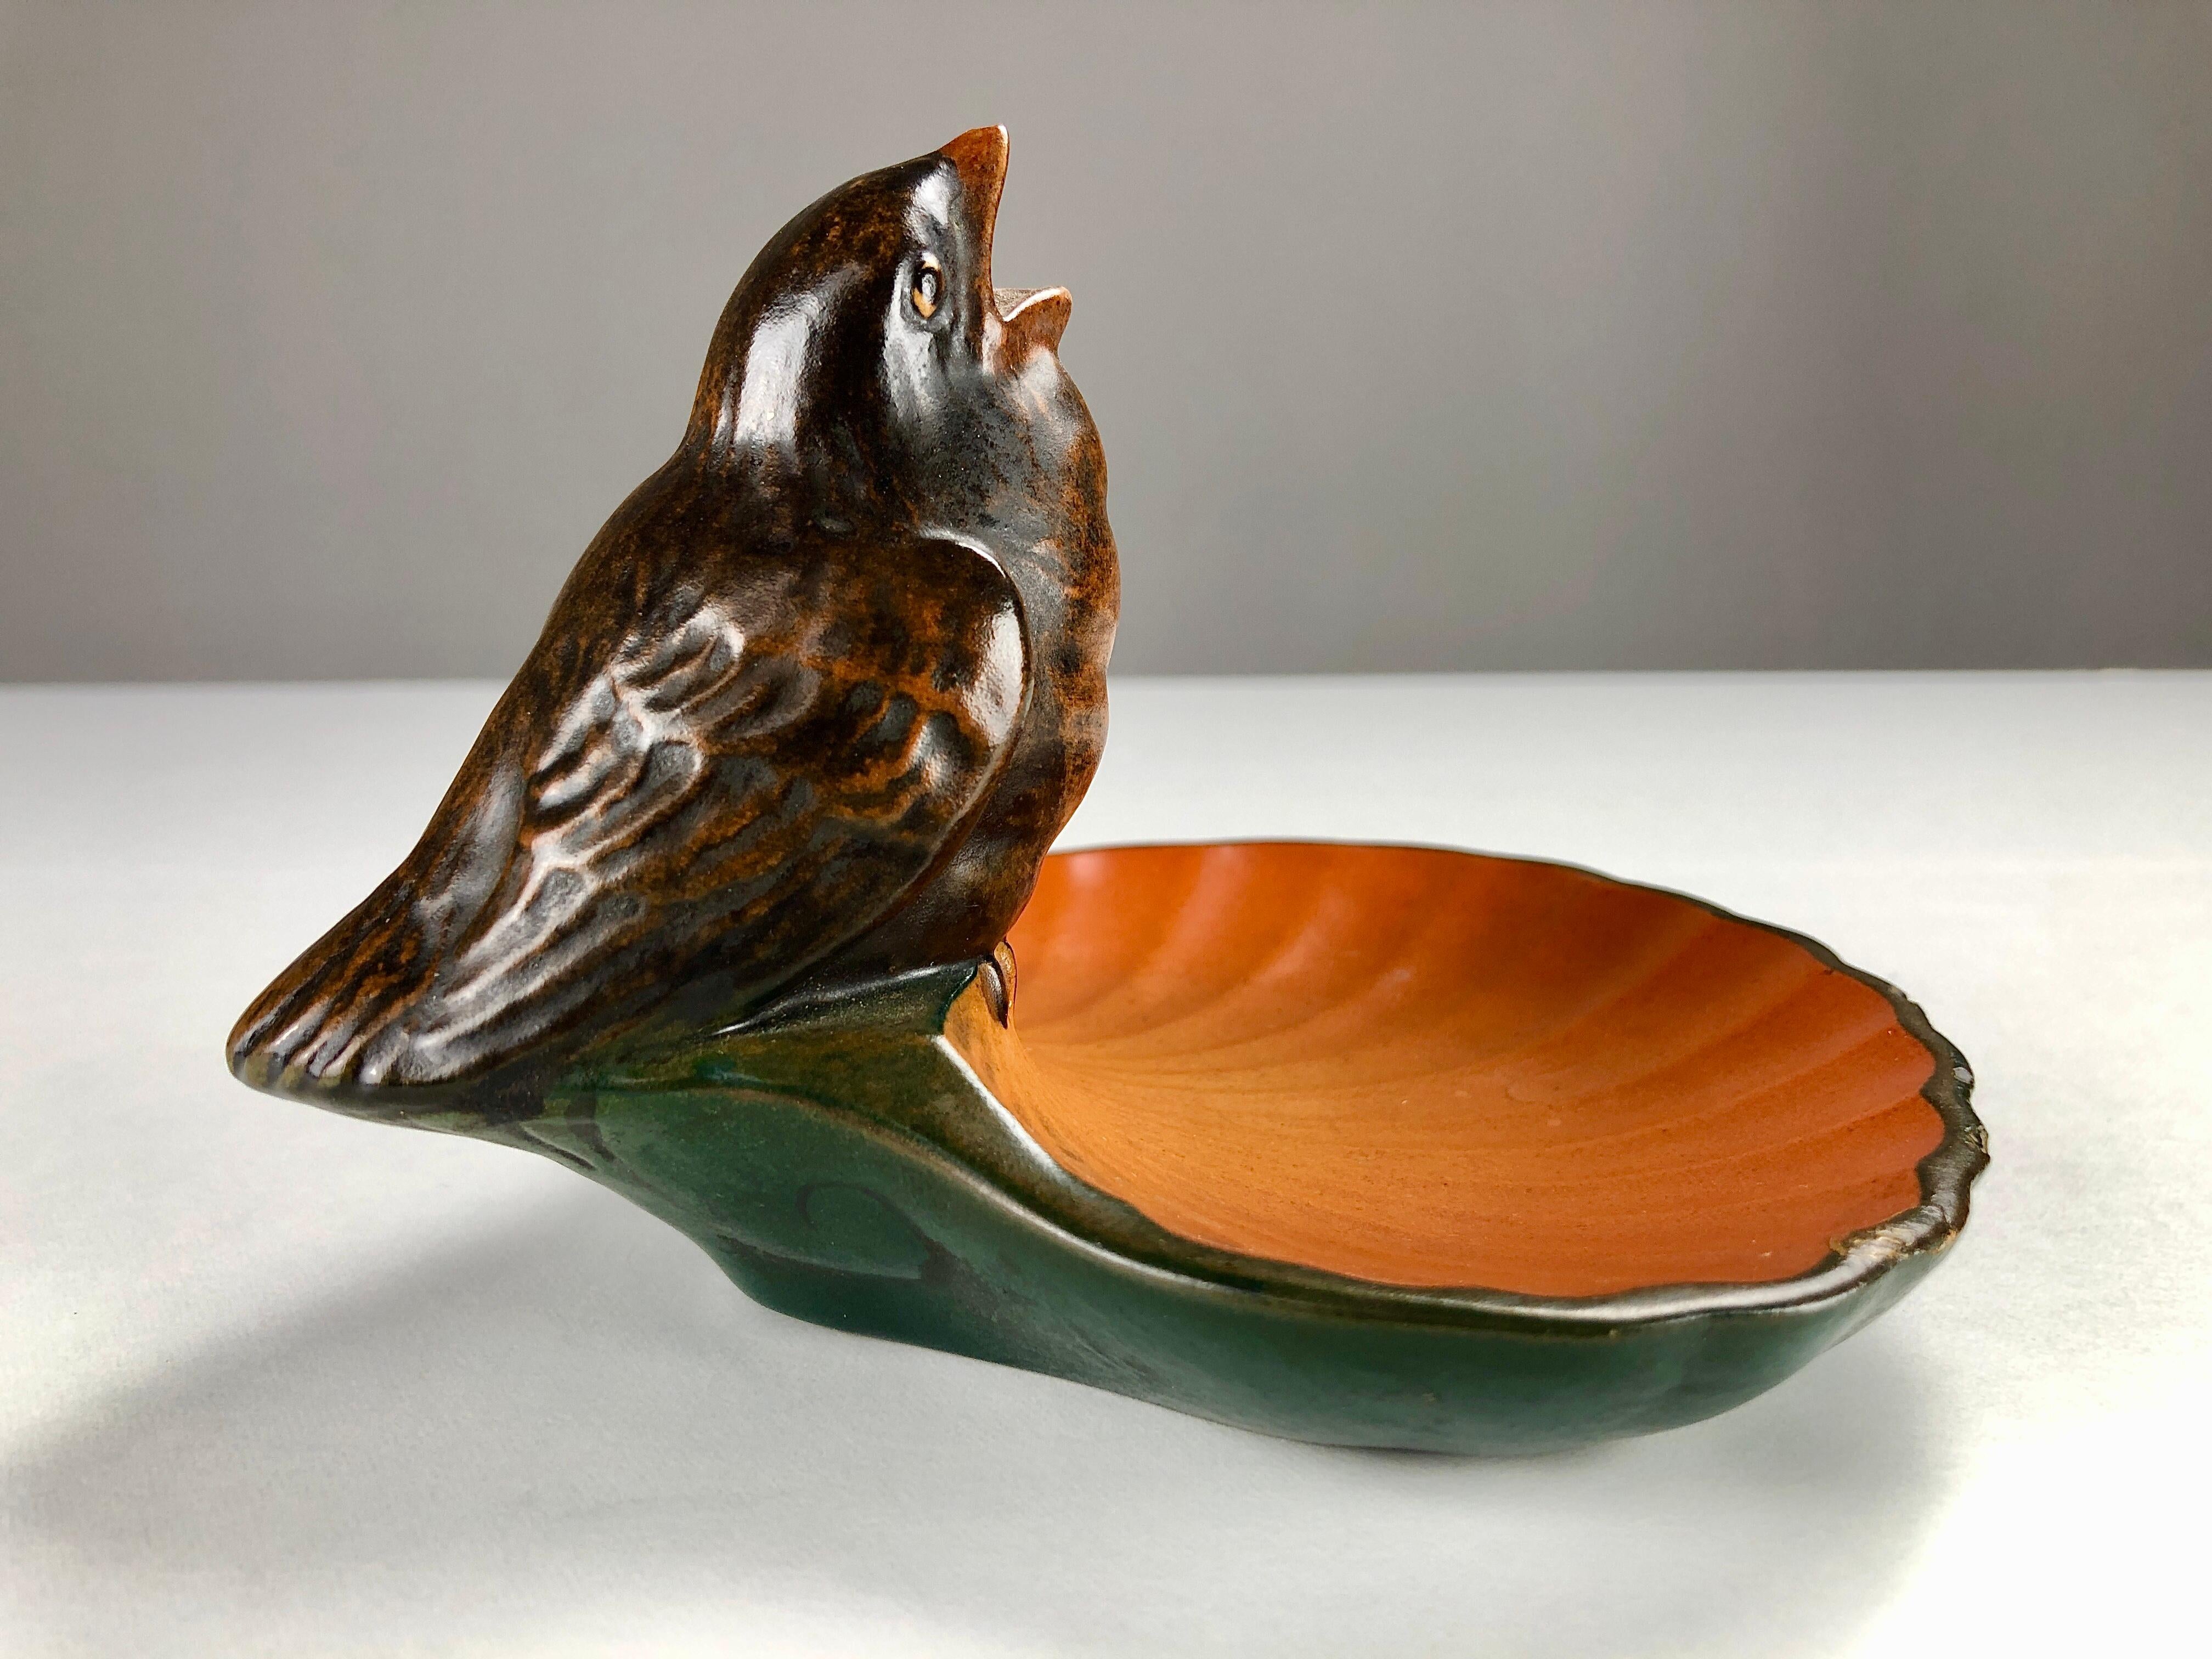 1920's Hand-Crafted Danish Art Nouveau Ash Tray / Bowl by P. Ipsens Enke For Sale 1